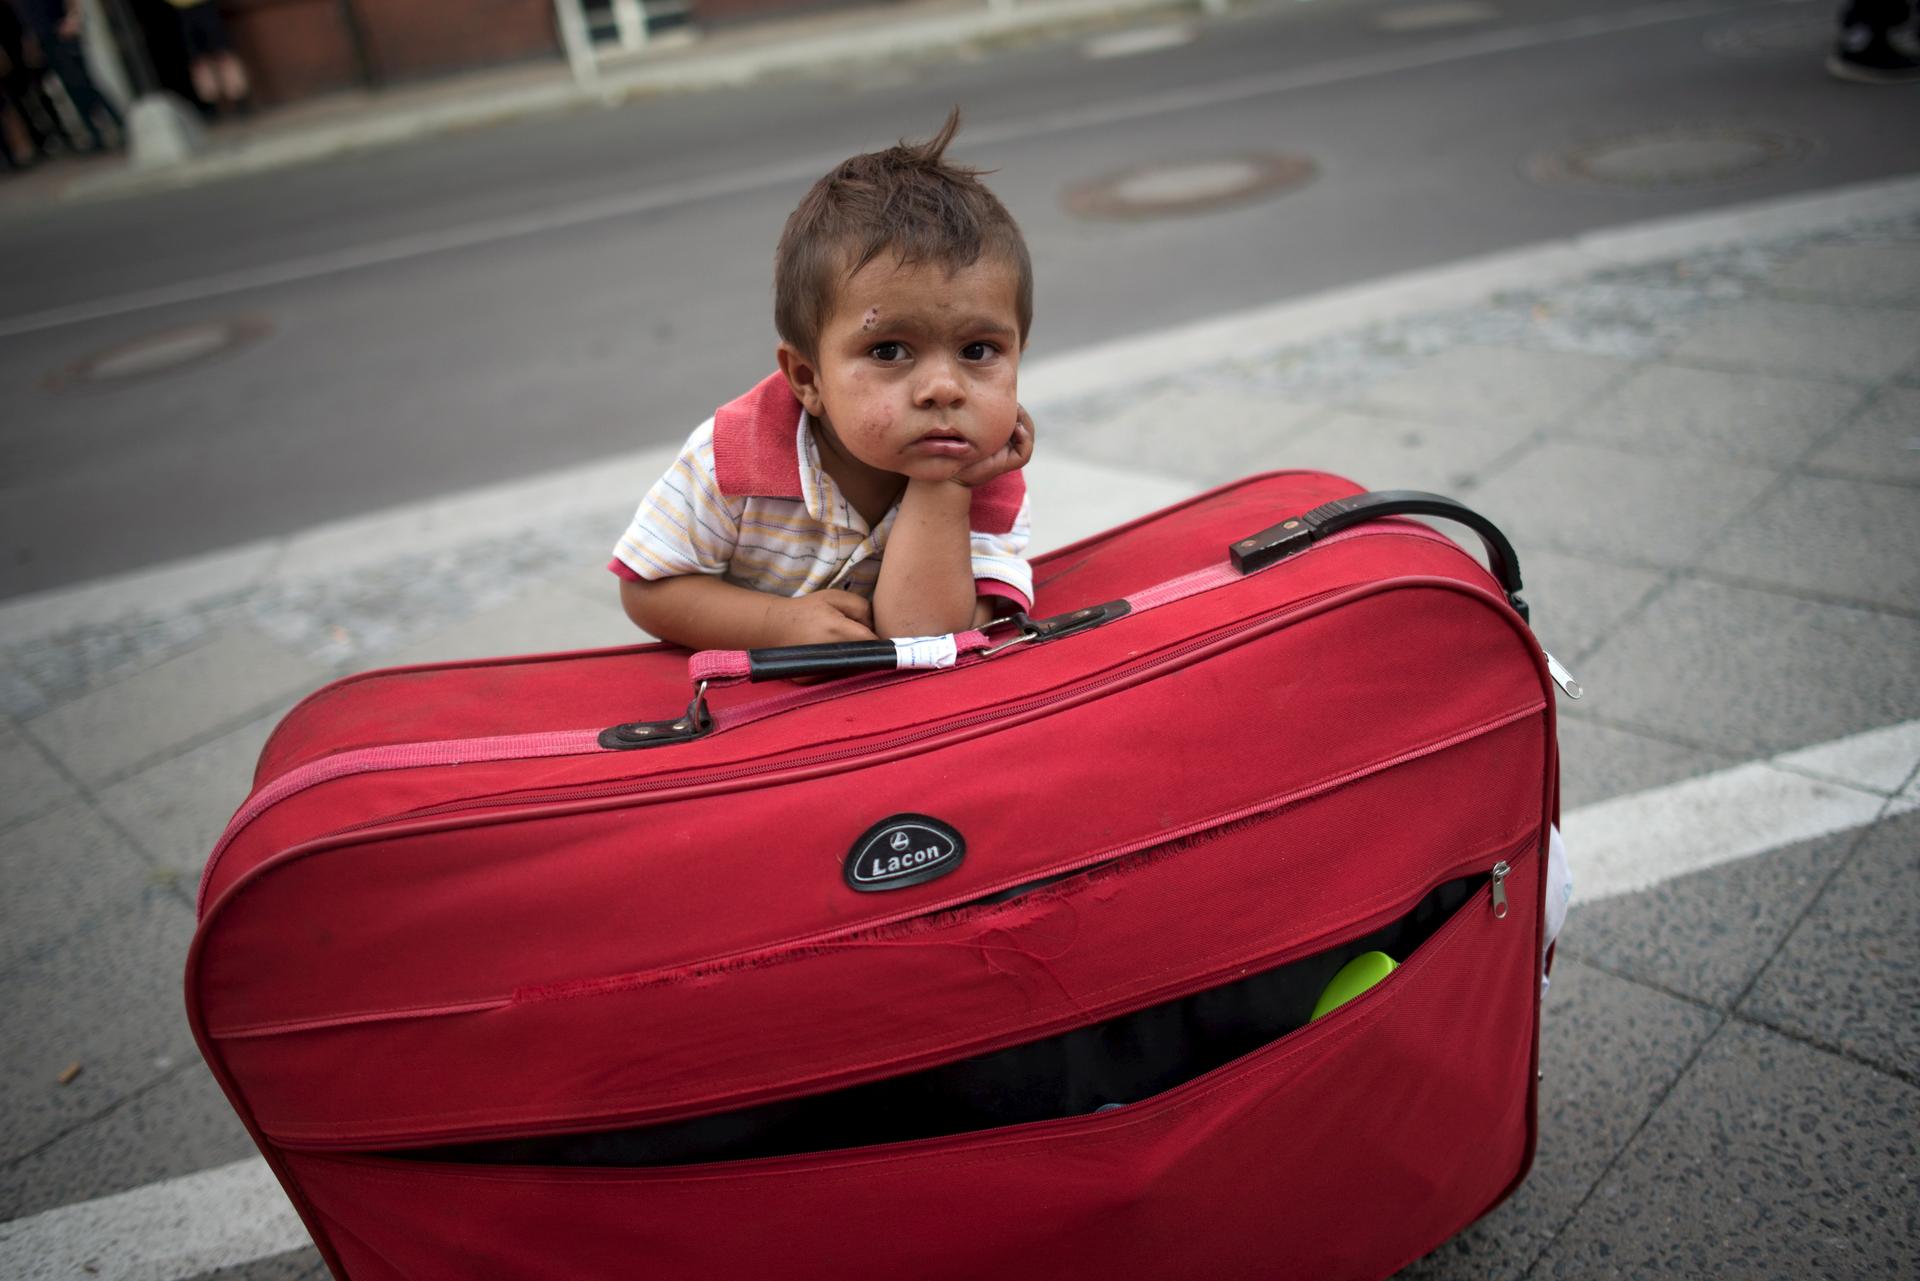 A migrant boy guards his parents' suitcase, as the family waits all day to apply for asylum in Berlin.